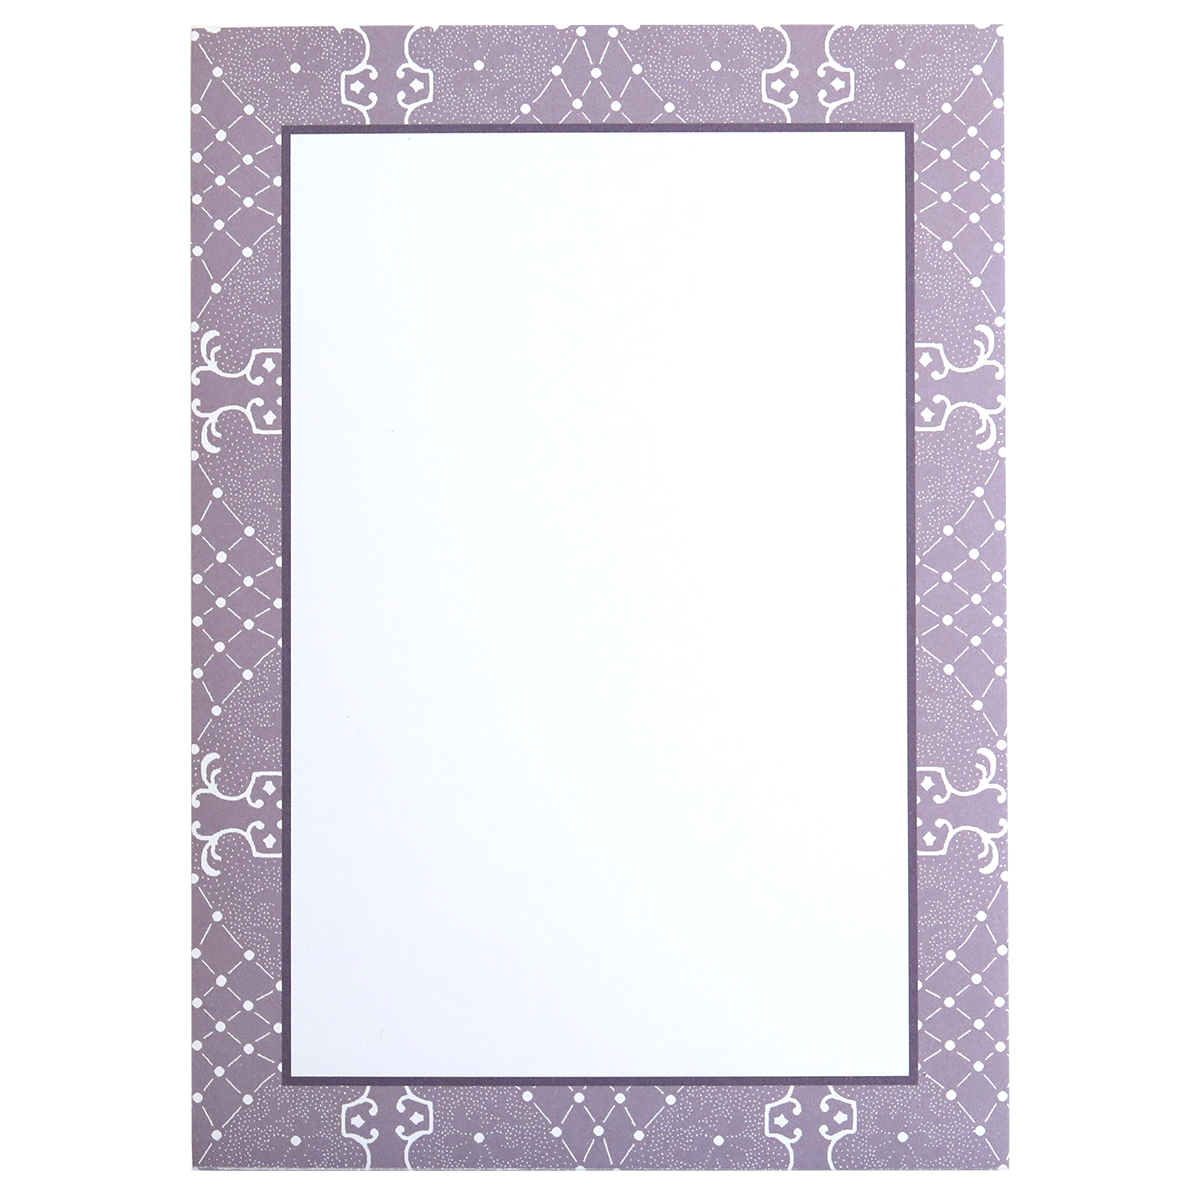 Rectangular Astrid Note Pad Set with a geometric pattern border and note pad size.